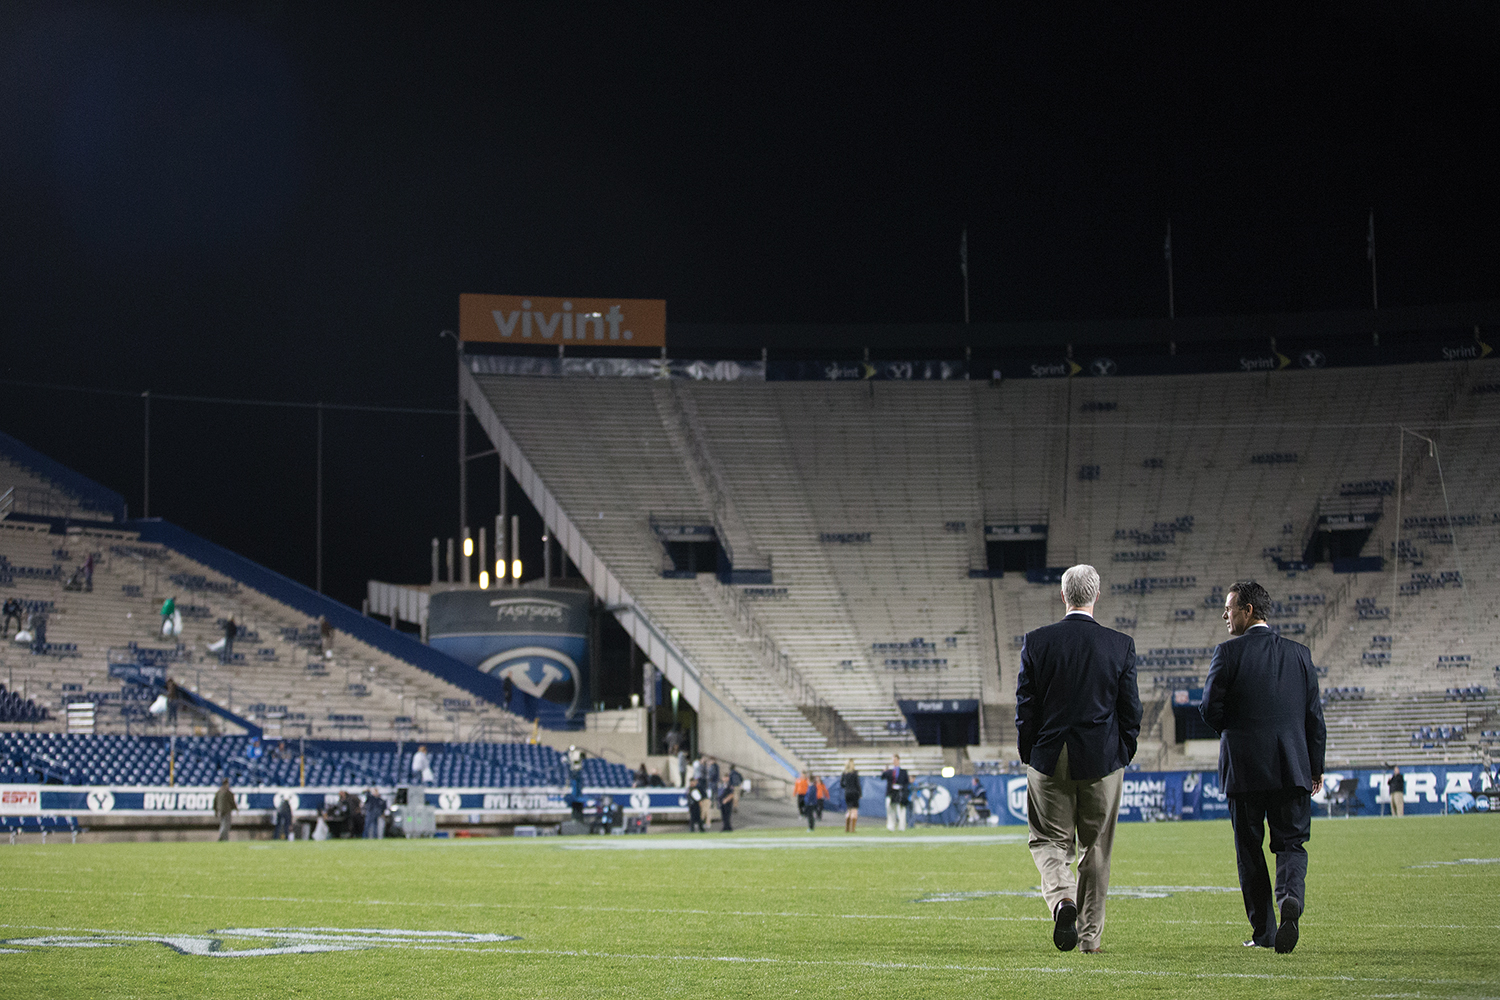 BYU's president and a vice president stroll across the field after a football game.